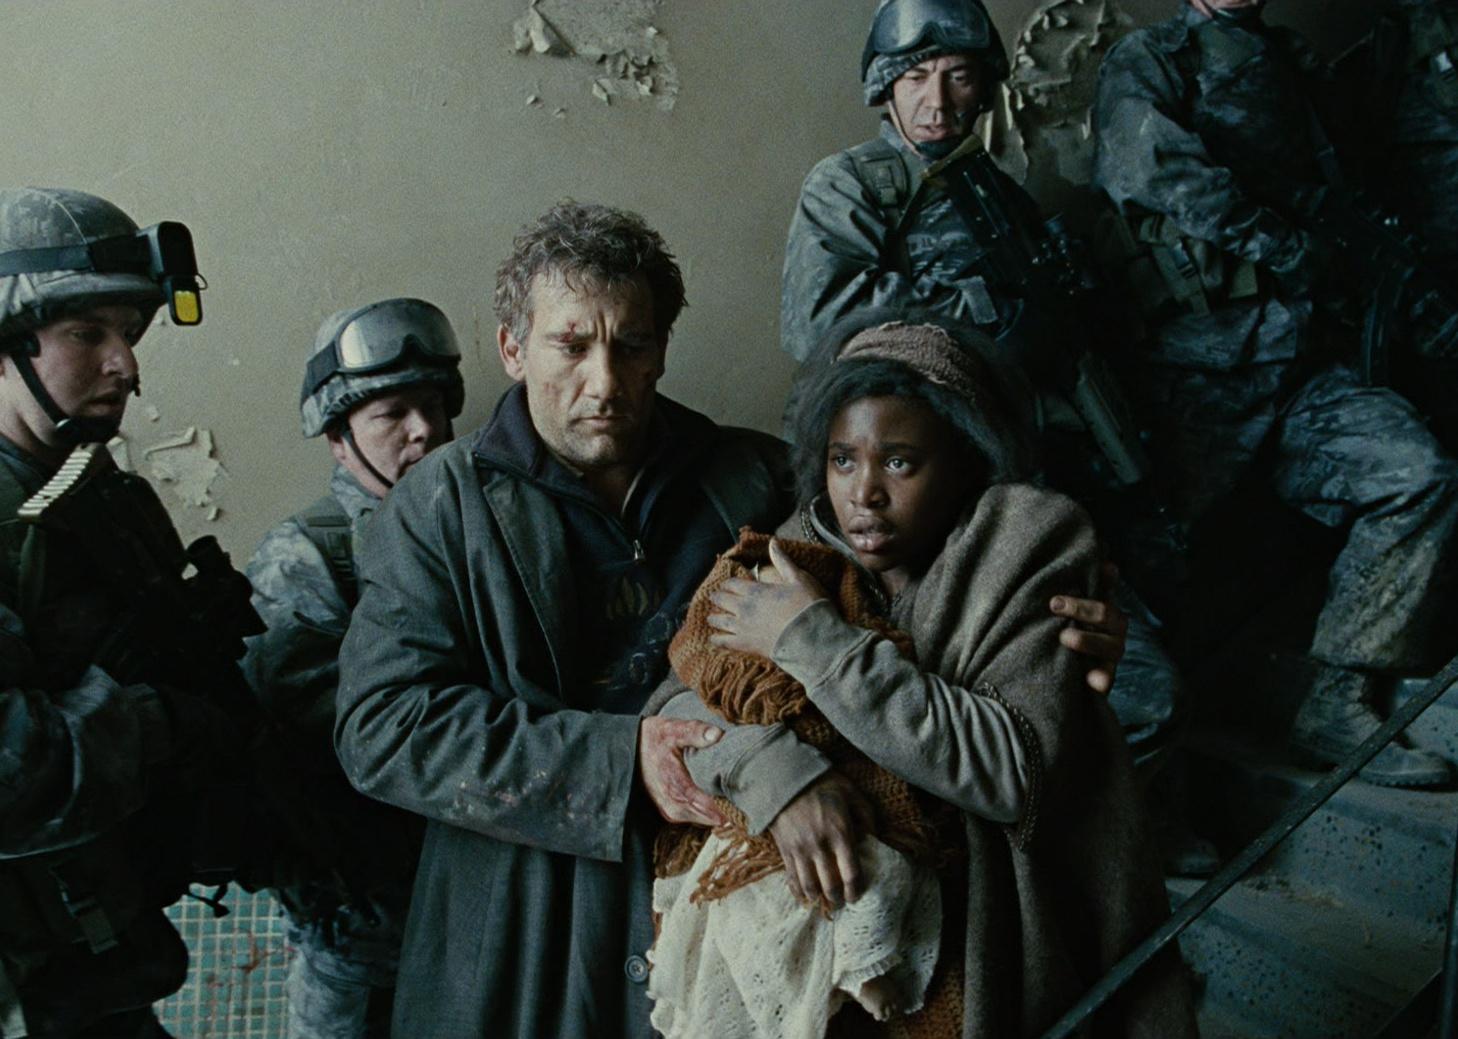 Clive Owen stands at the bottom of a flight of stairs protecting a young woman holding a baby with military men lining the stairs.